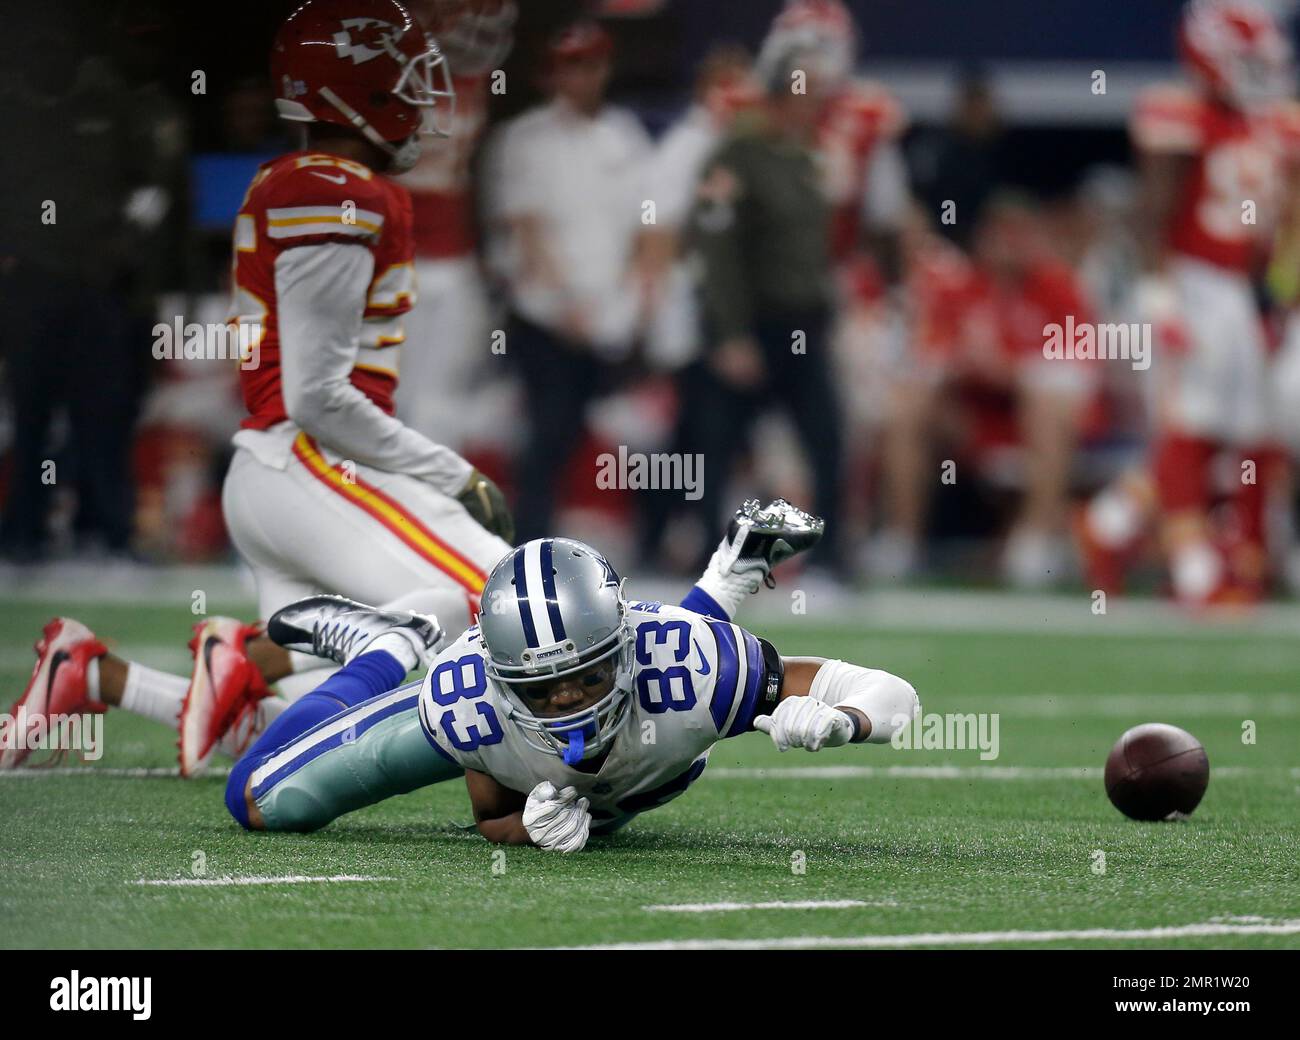 Dallas Cowboys' Terrance Williams (83) does a military-styled